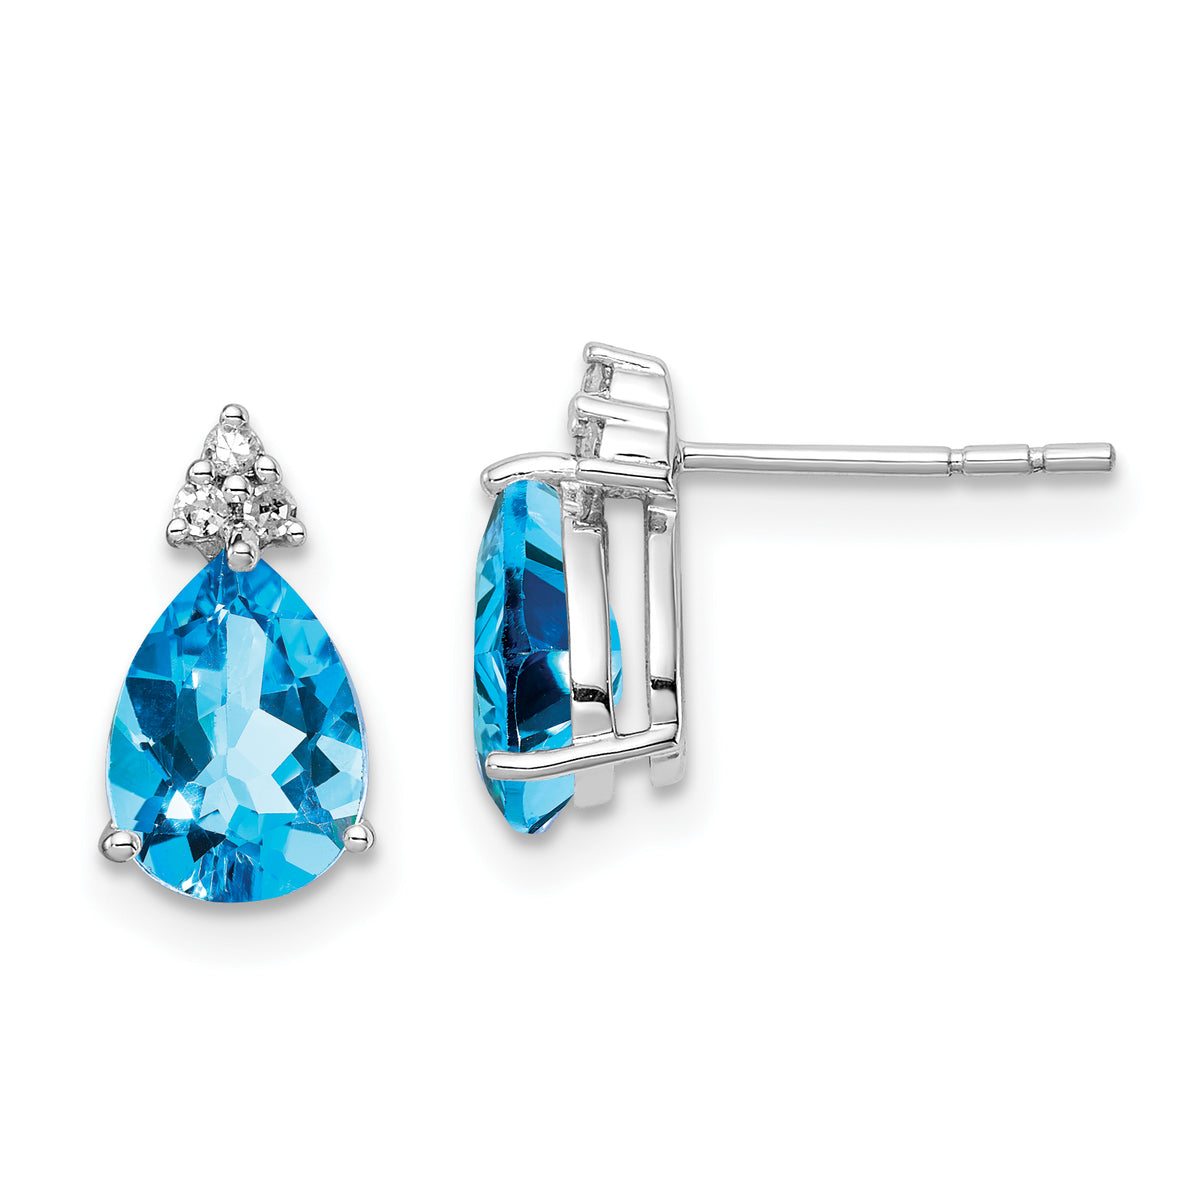 Sterling Silver Rhodium Plated Diamond and Blue Topaz Post Earrings